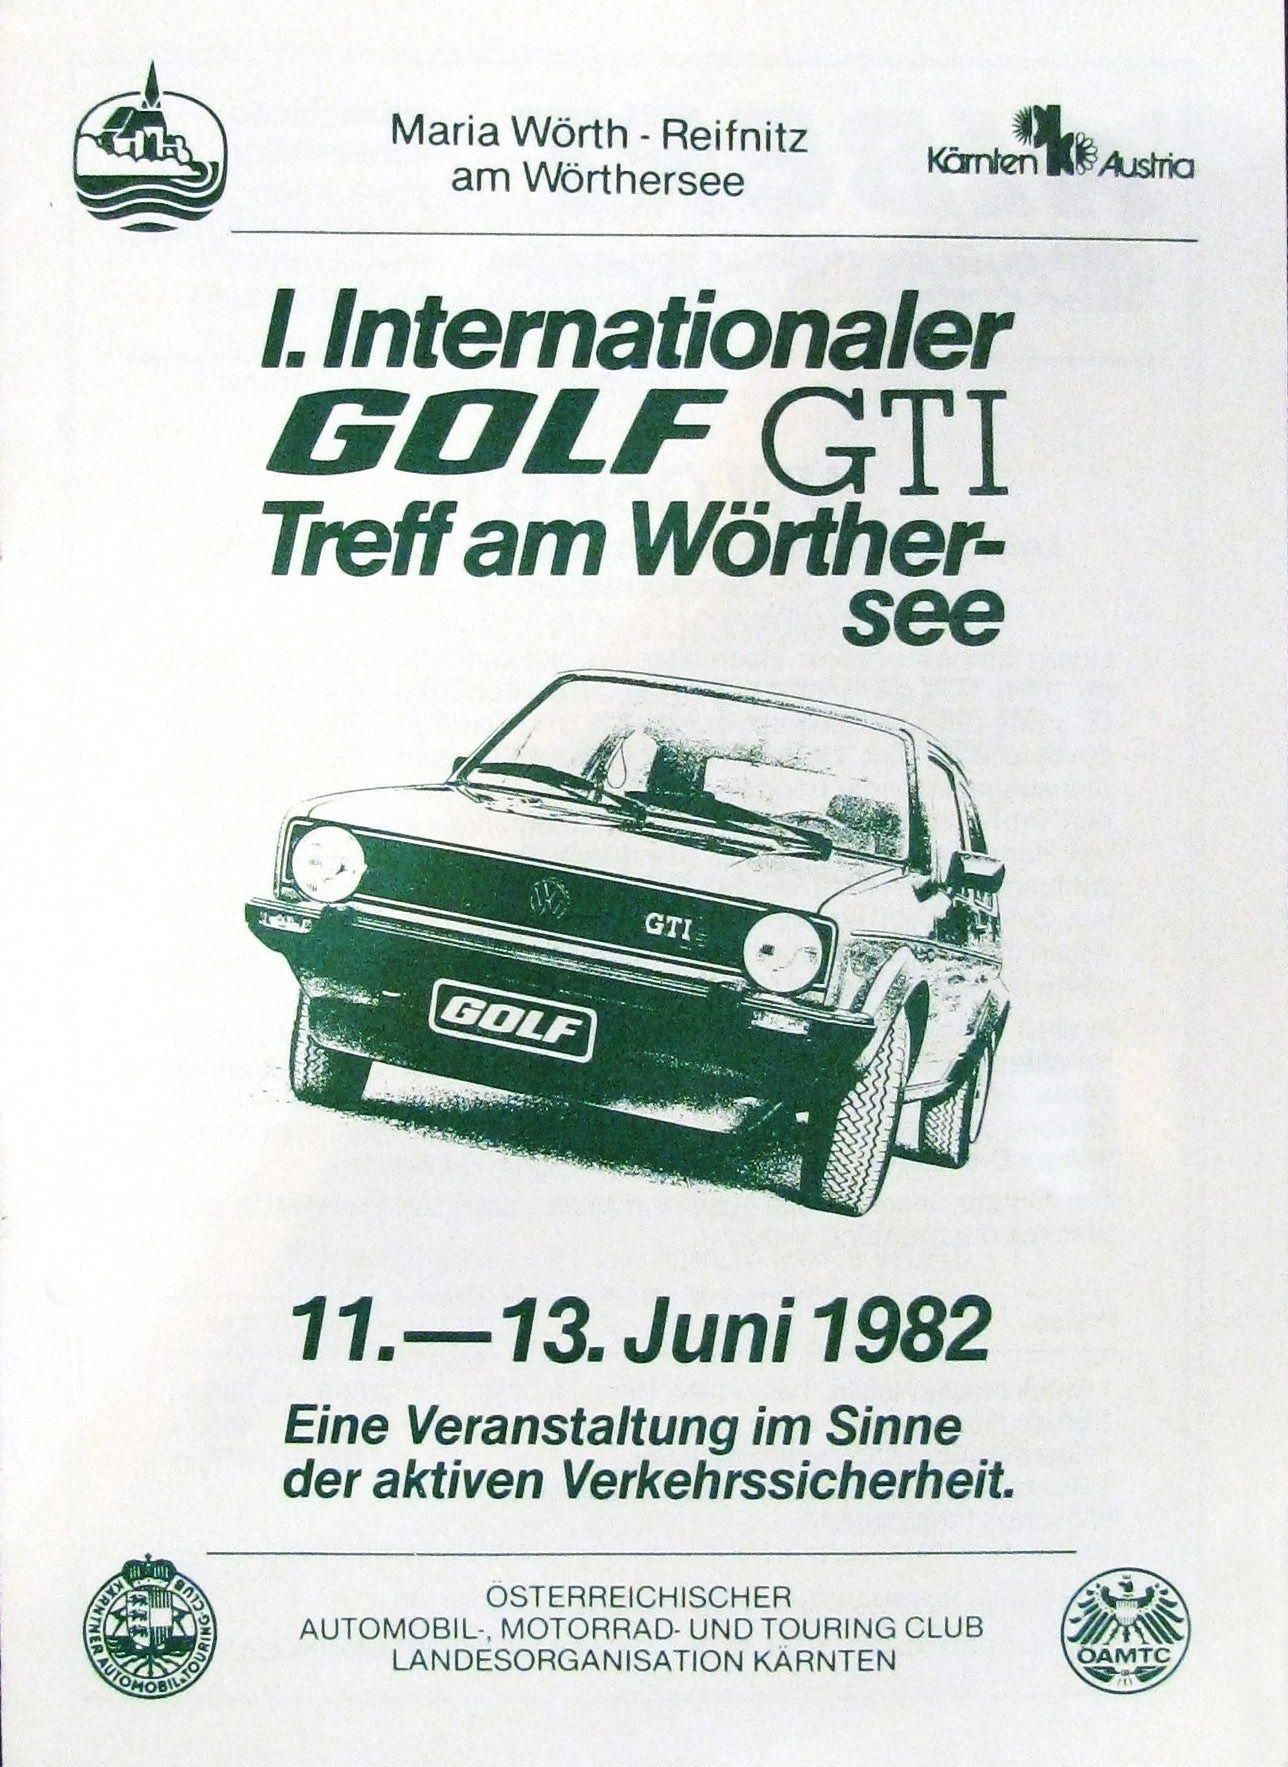 Save the date: Legendary GTI Meeting to be held in Wolfsburg from